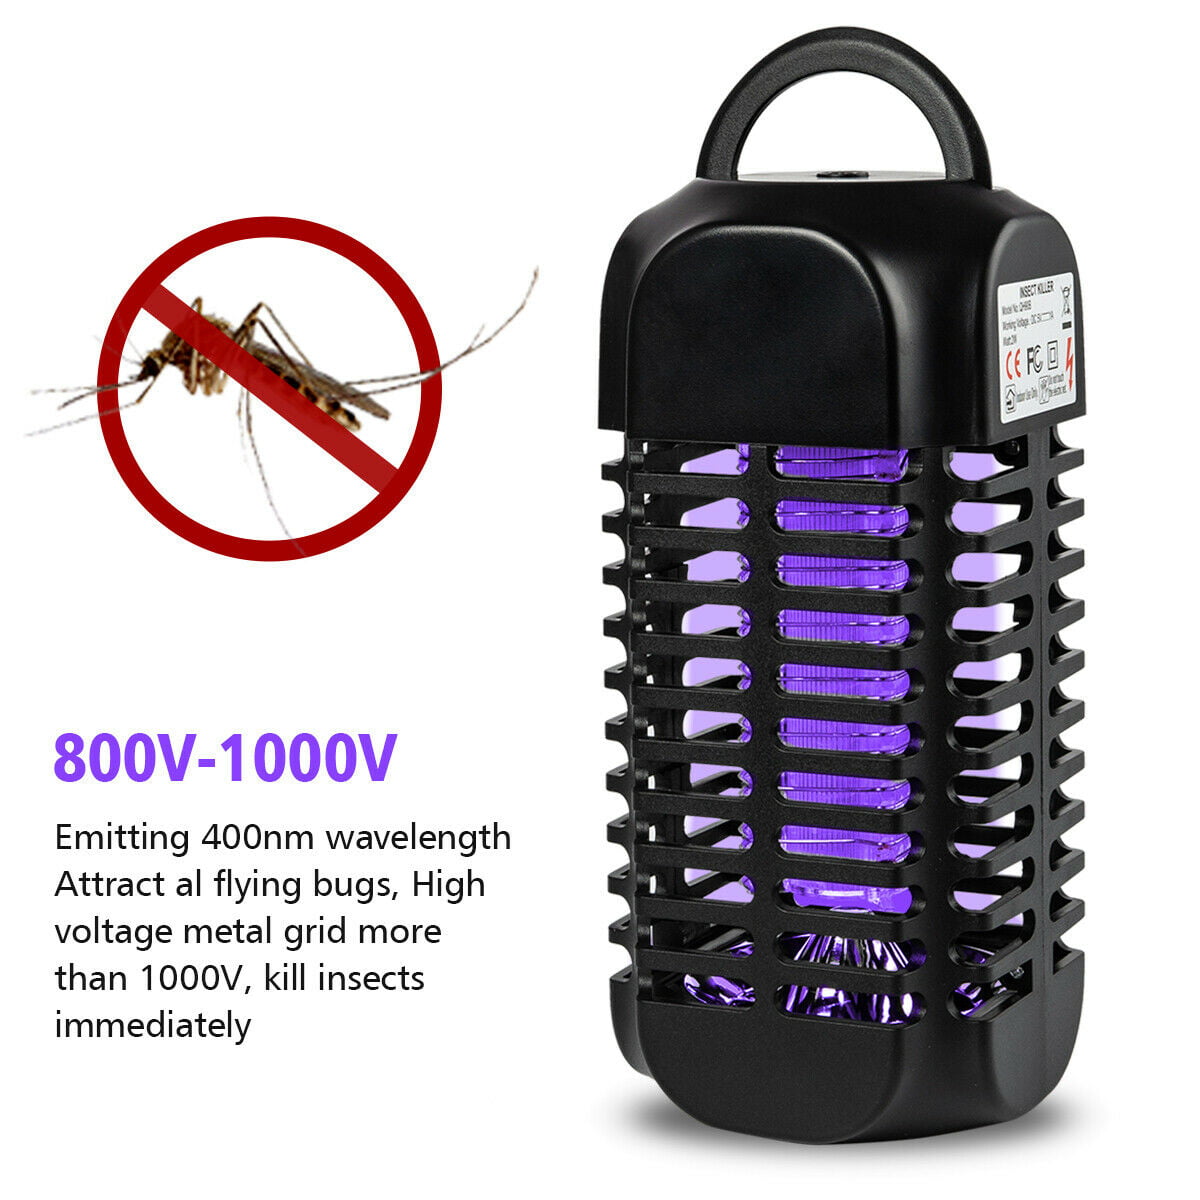 Electric UV Light Fly Insect Killer Mosquito Wasp Kill Bug Pest Zap Trap Garden 